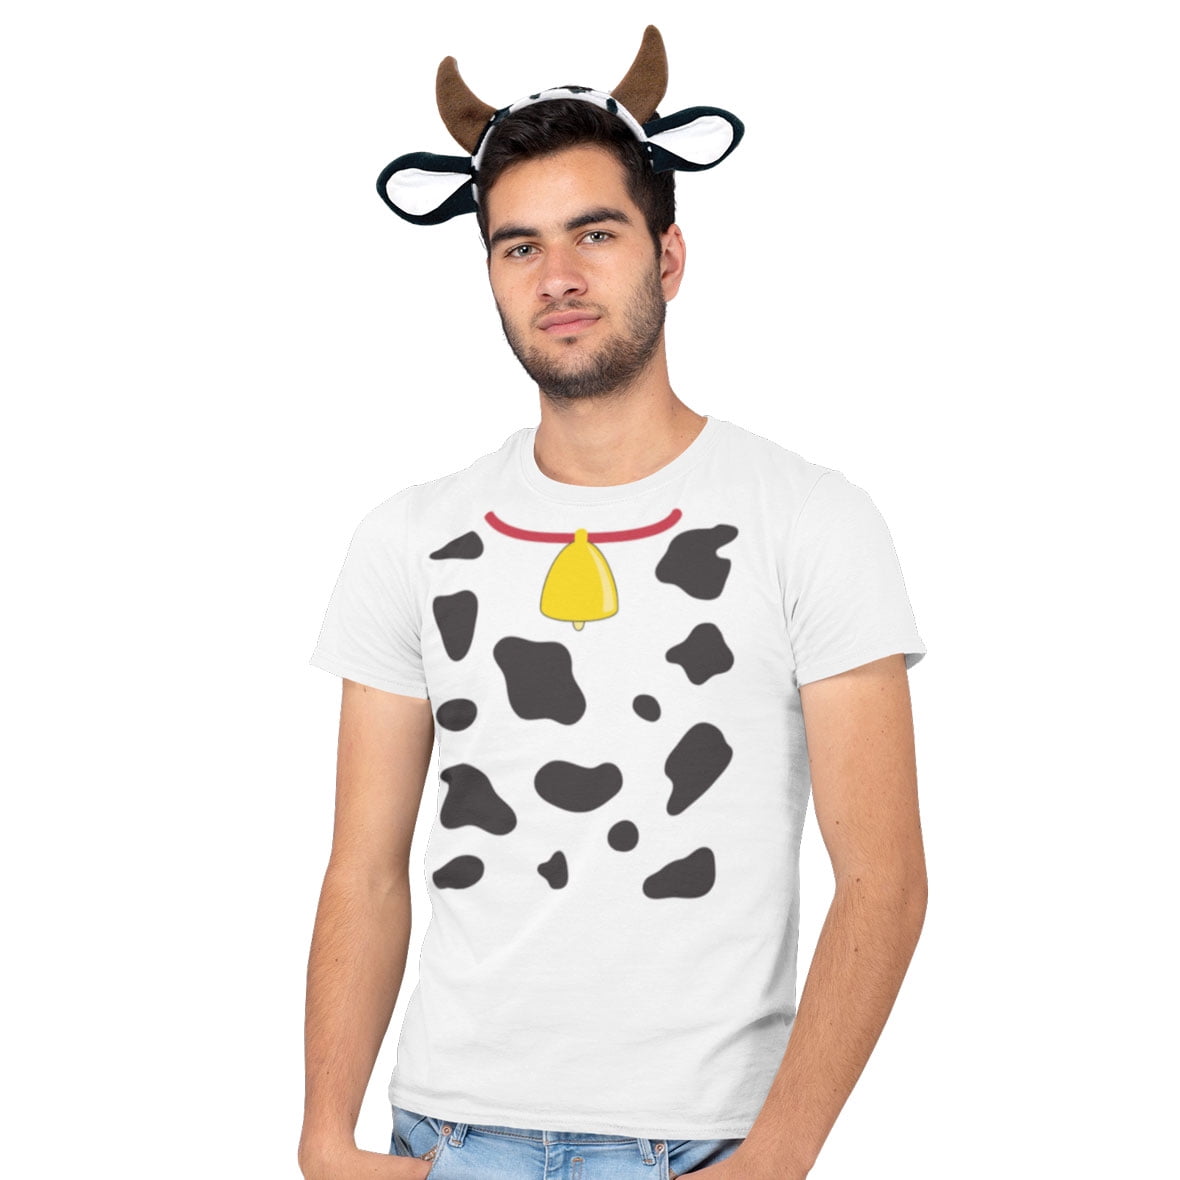 animalworld Halloween Costume Cow Pattern All Over Mens Costume T Shirt with Cow Ears Headband